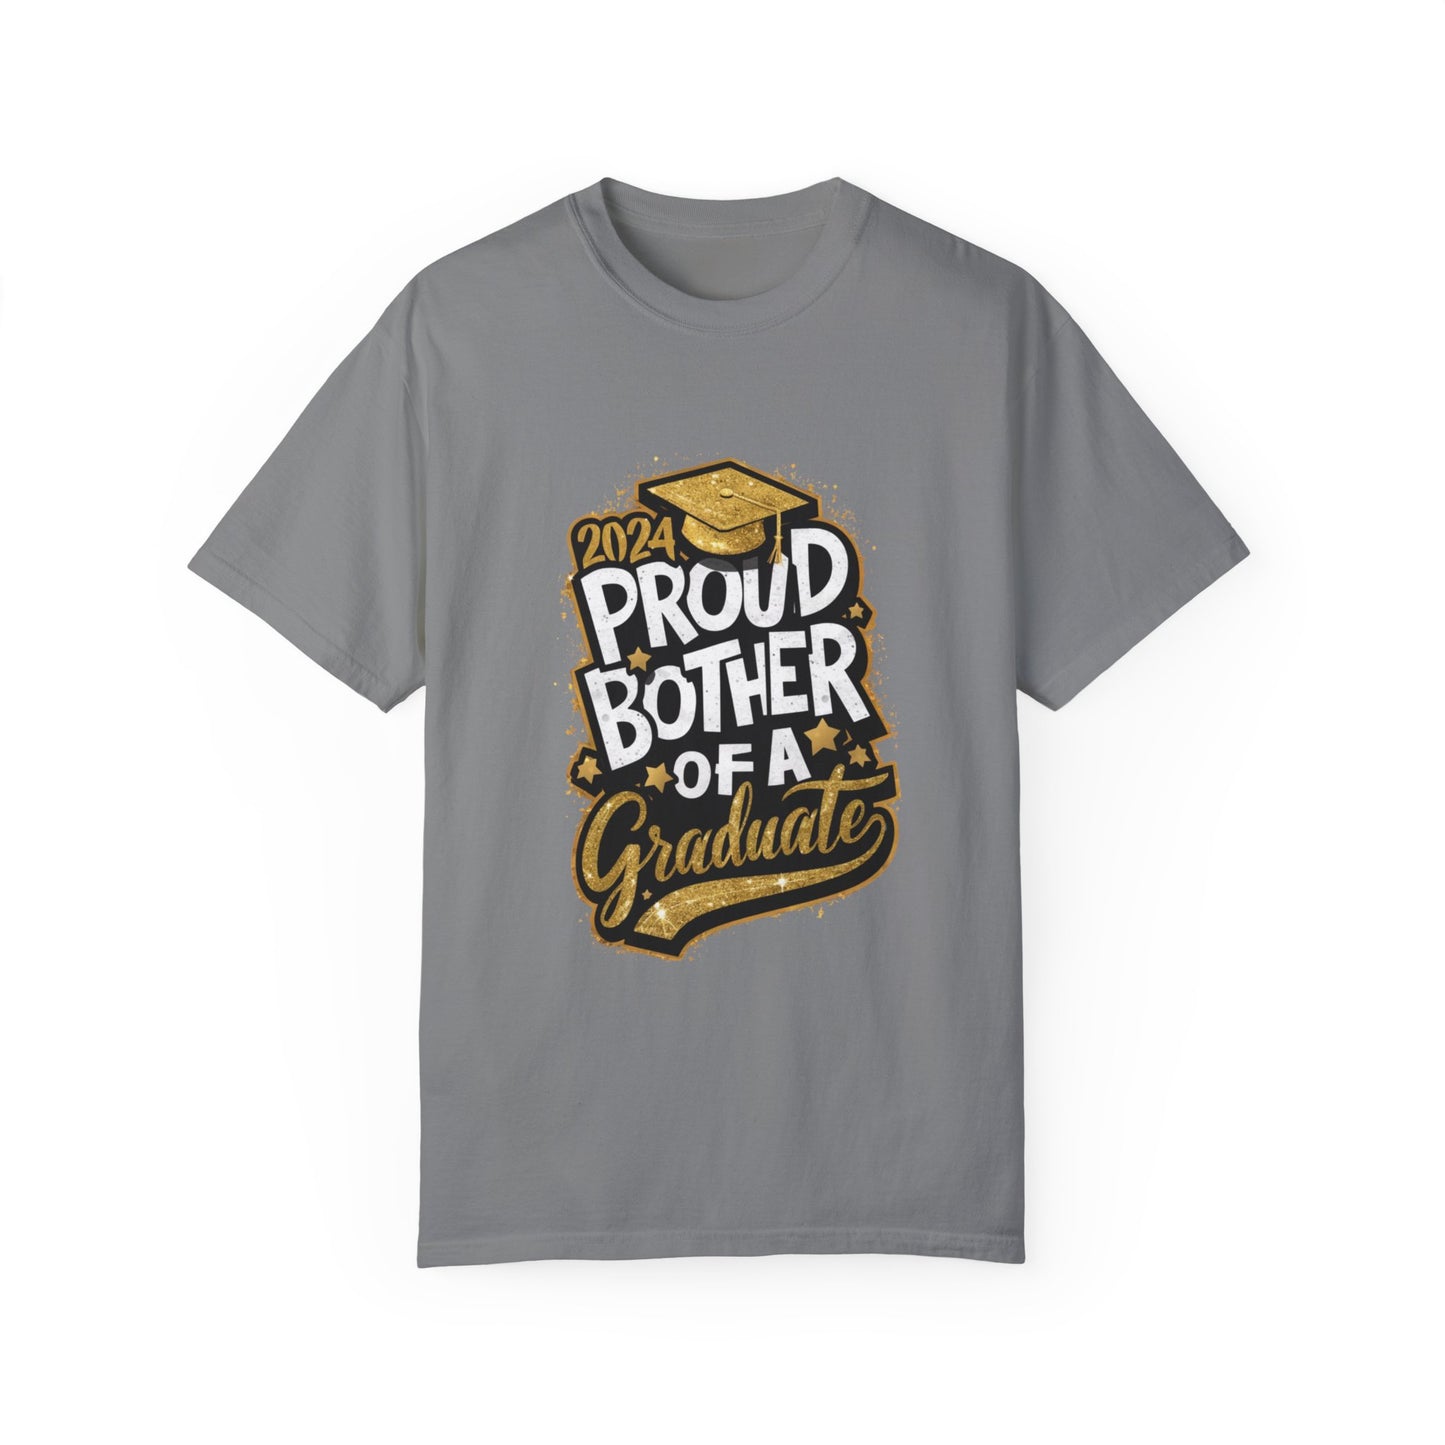 Proud Brother of a 2024 Graduate Unisex Garment-dyed T-shirt Cotton Funny Humorous Graphic Soft Premium Unisex Men Women Grey T-shirt Birthday Gift-9